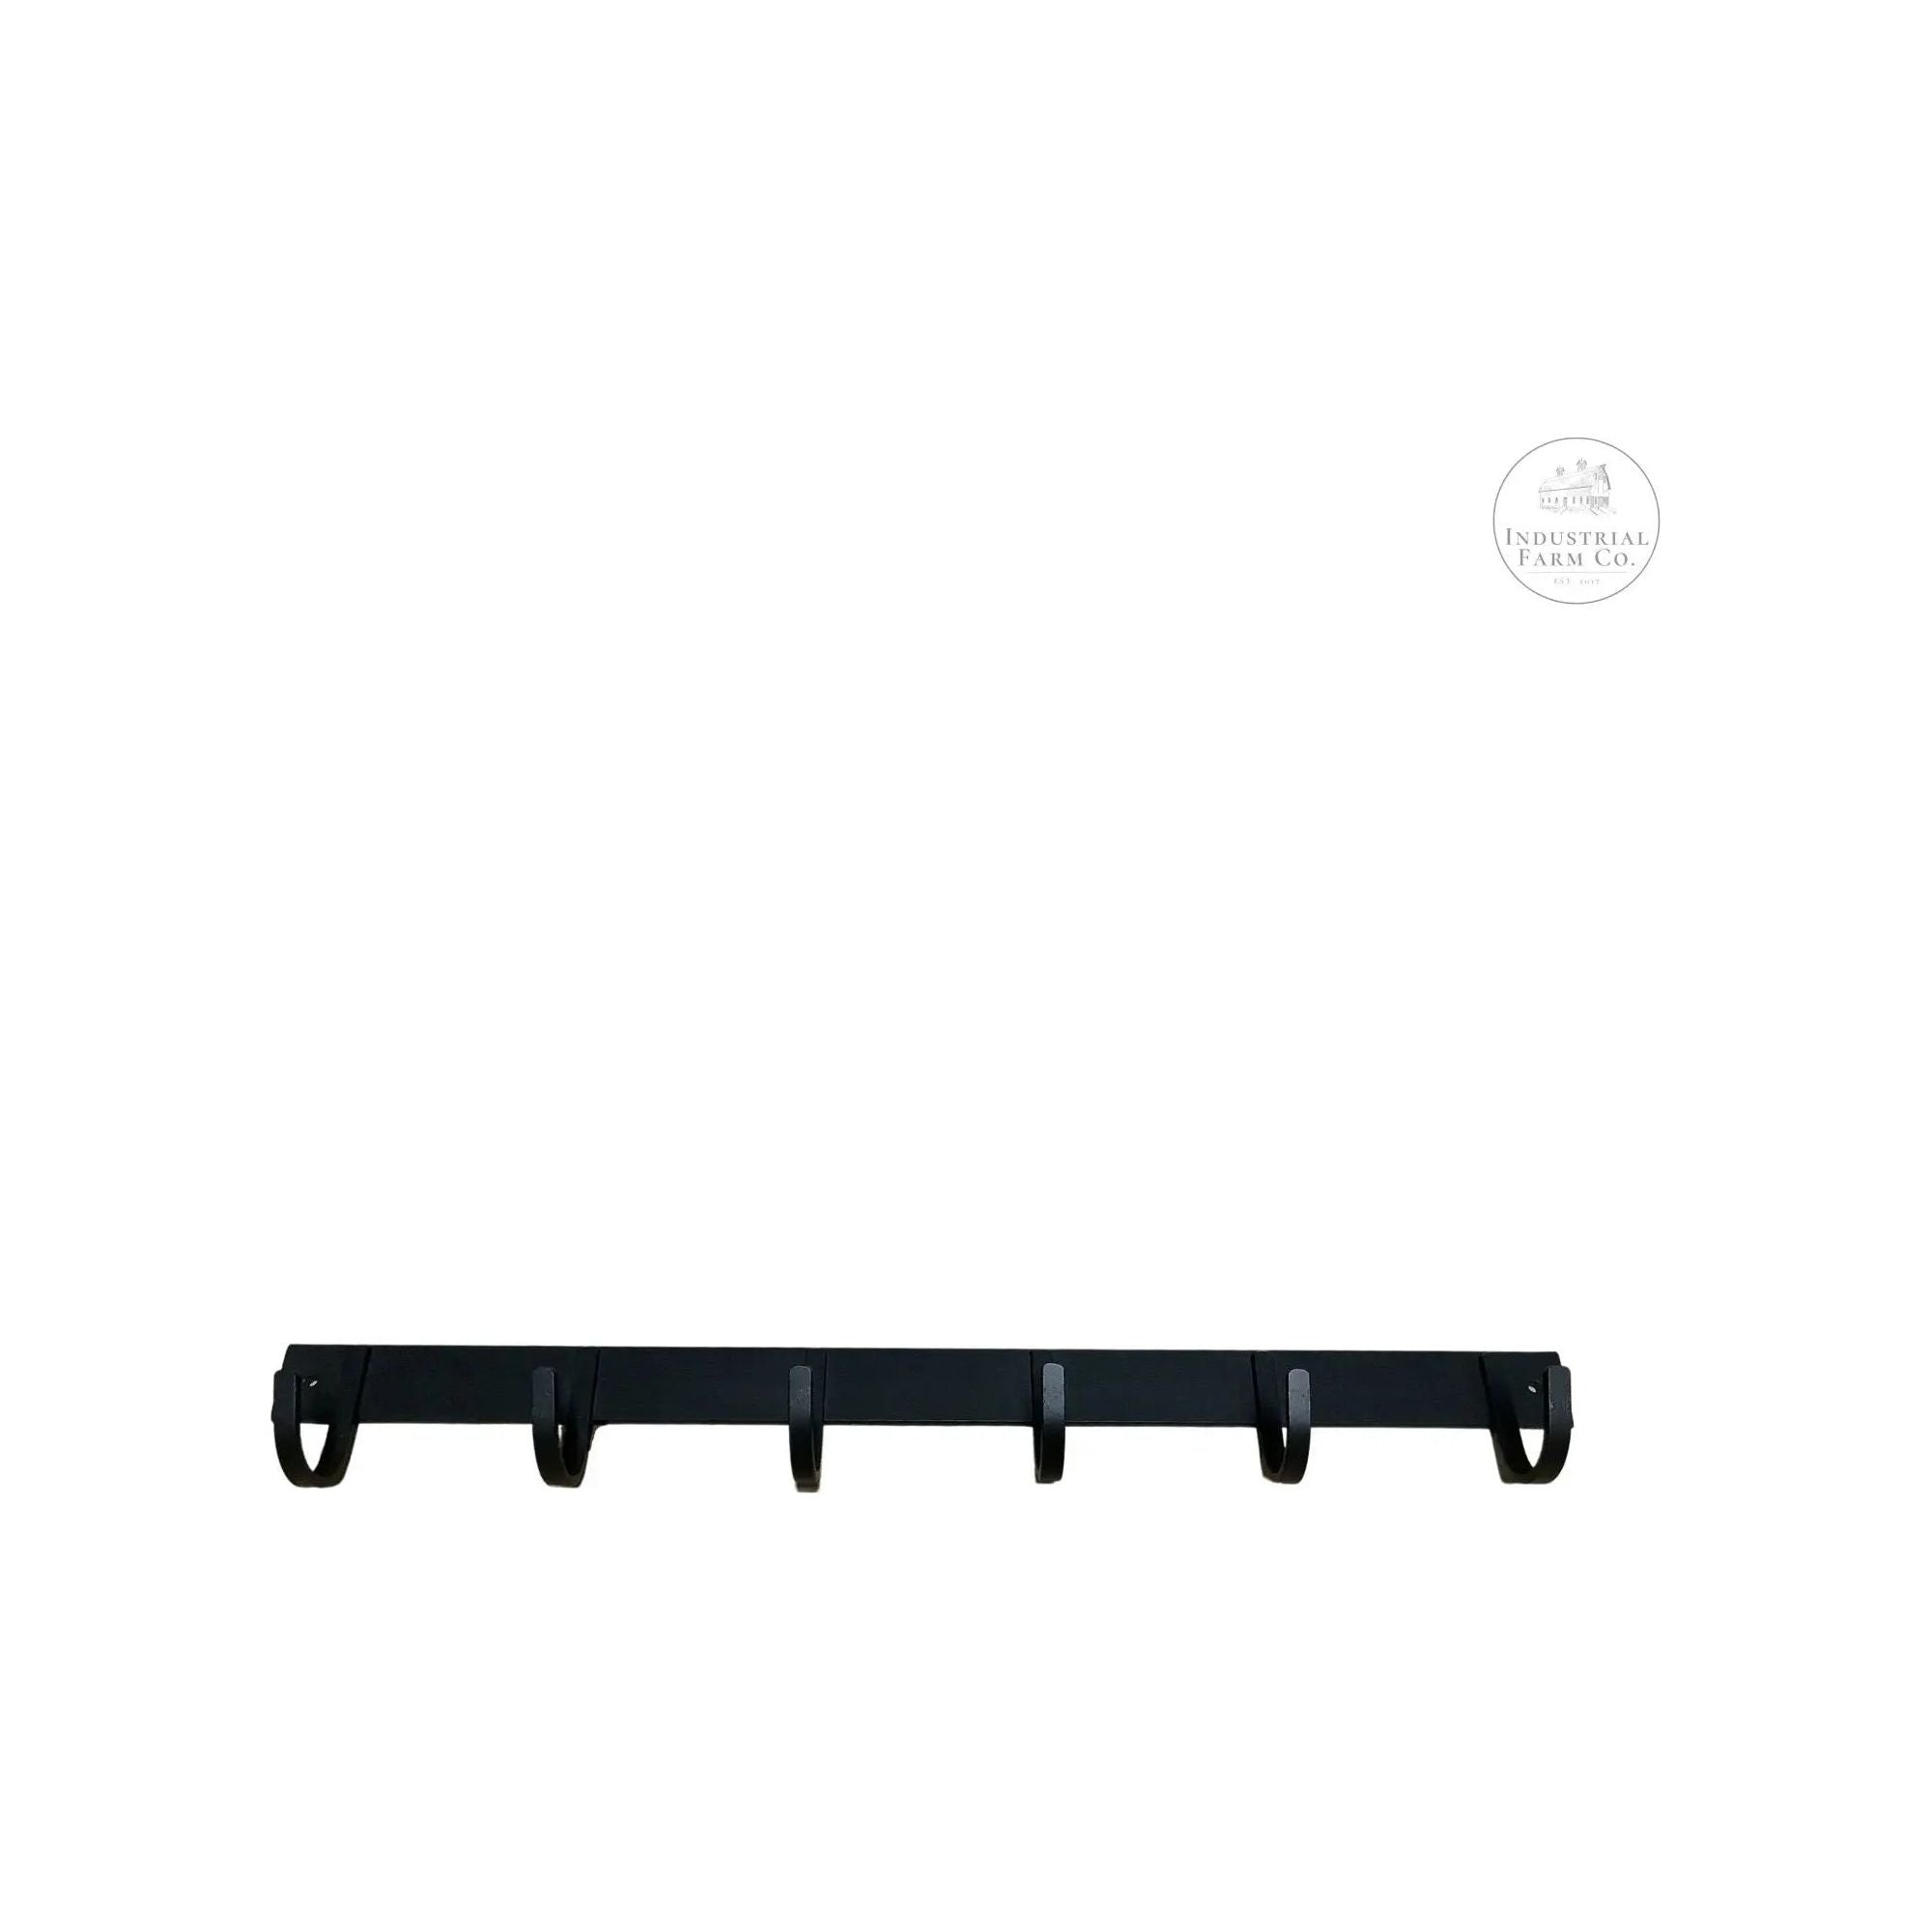 The Camillus Coat Rack - 30 Inches Long | Industrial Farm Co